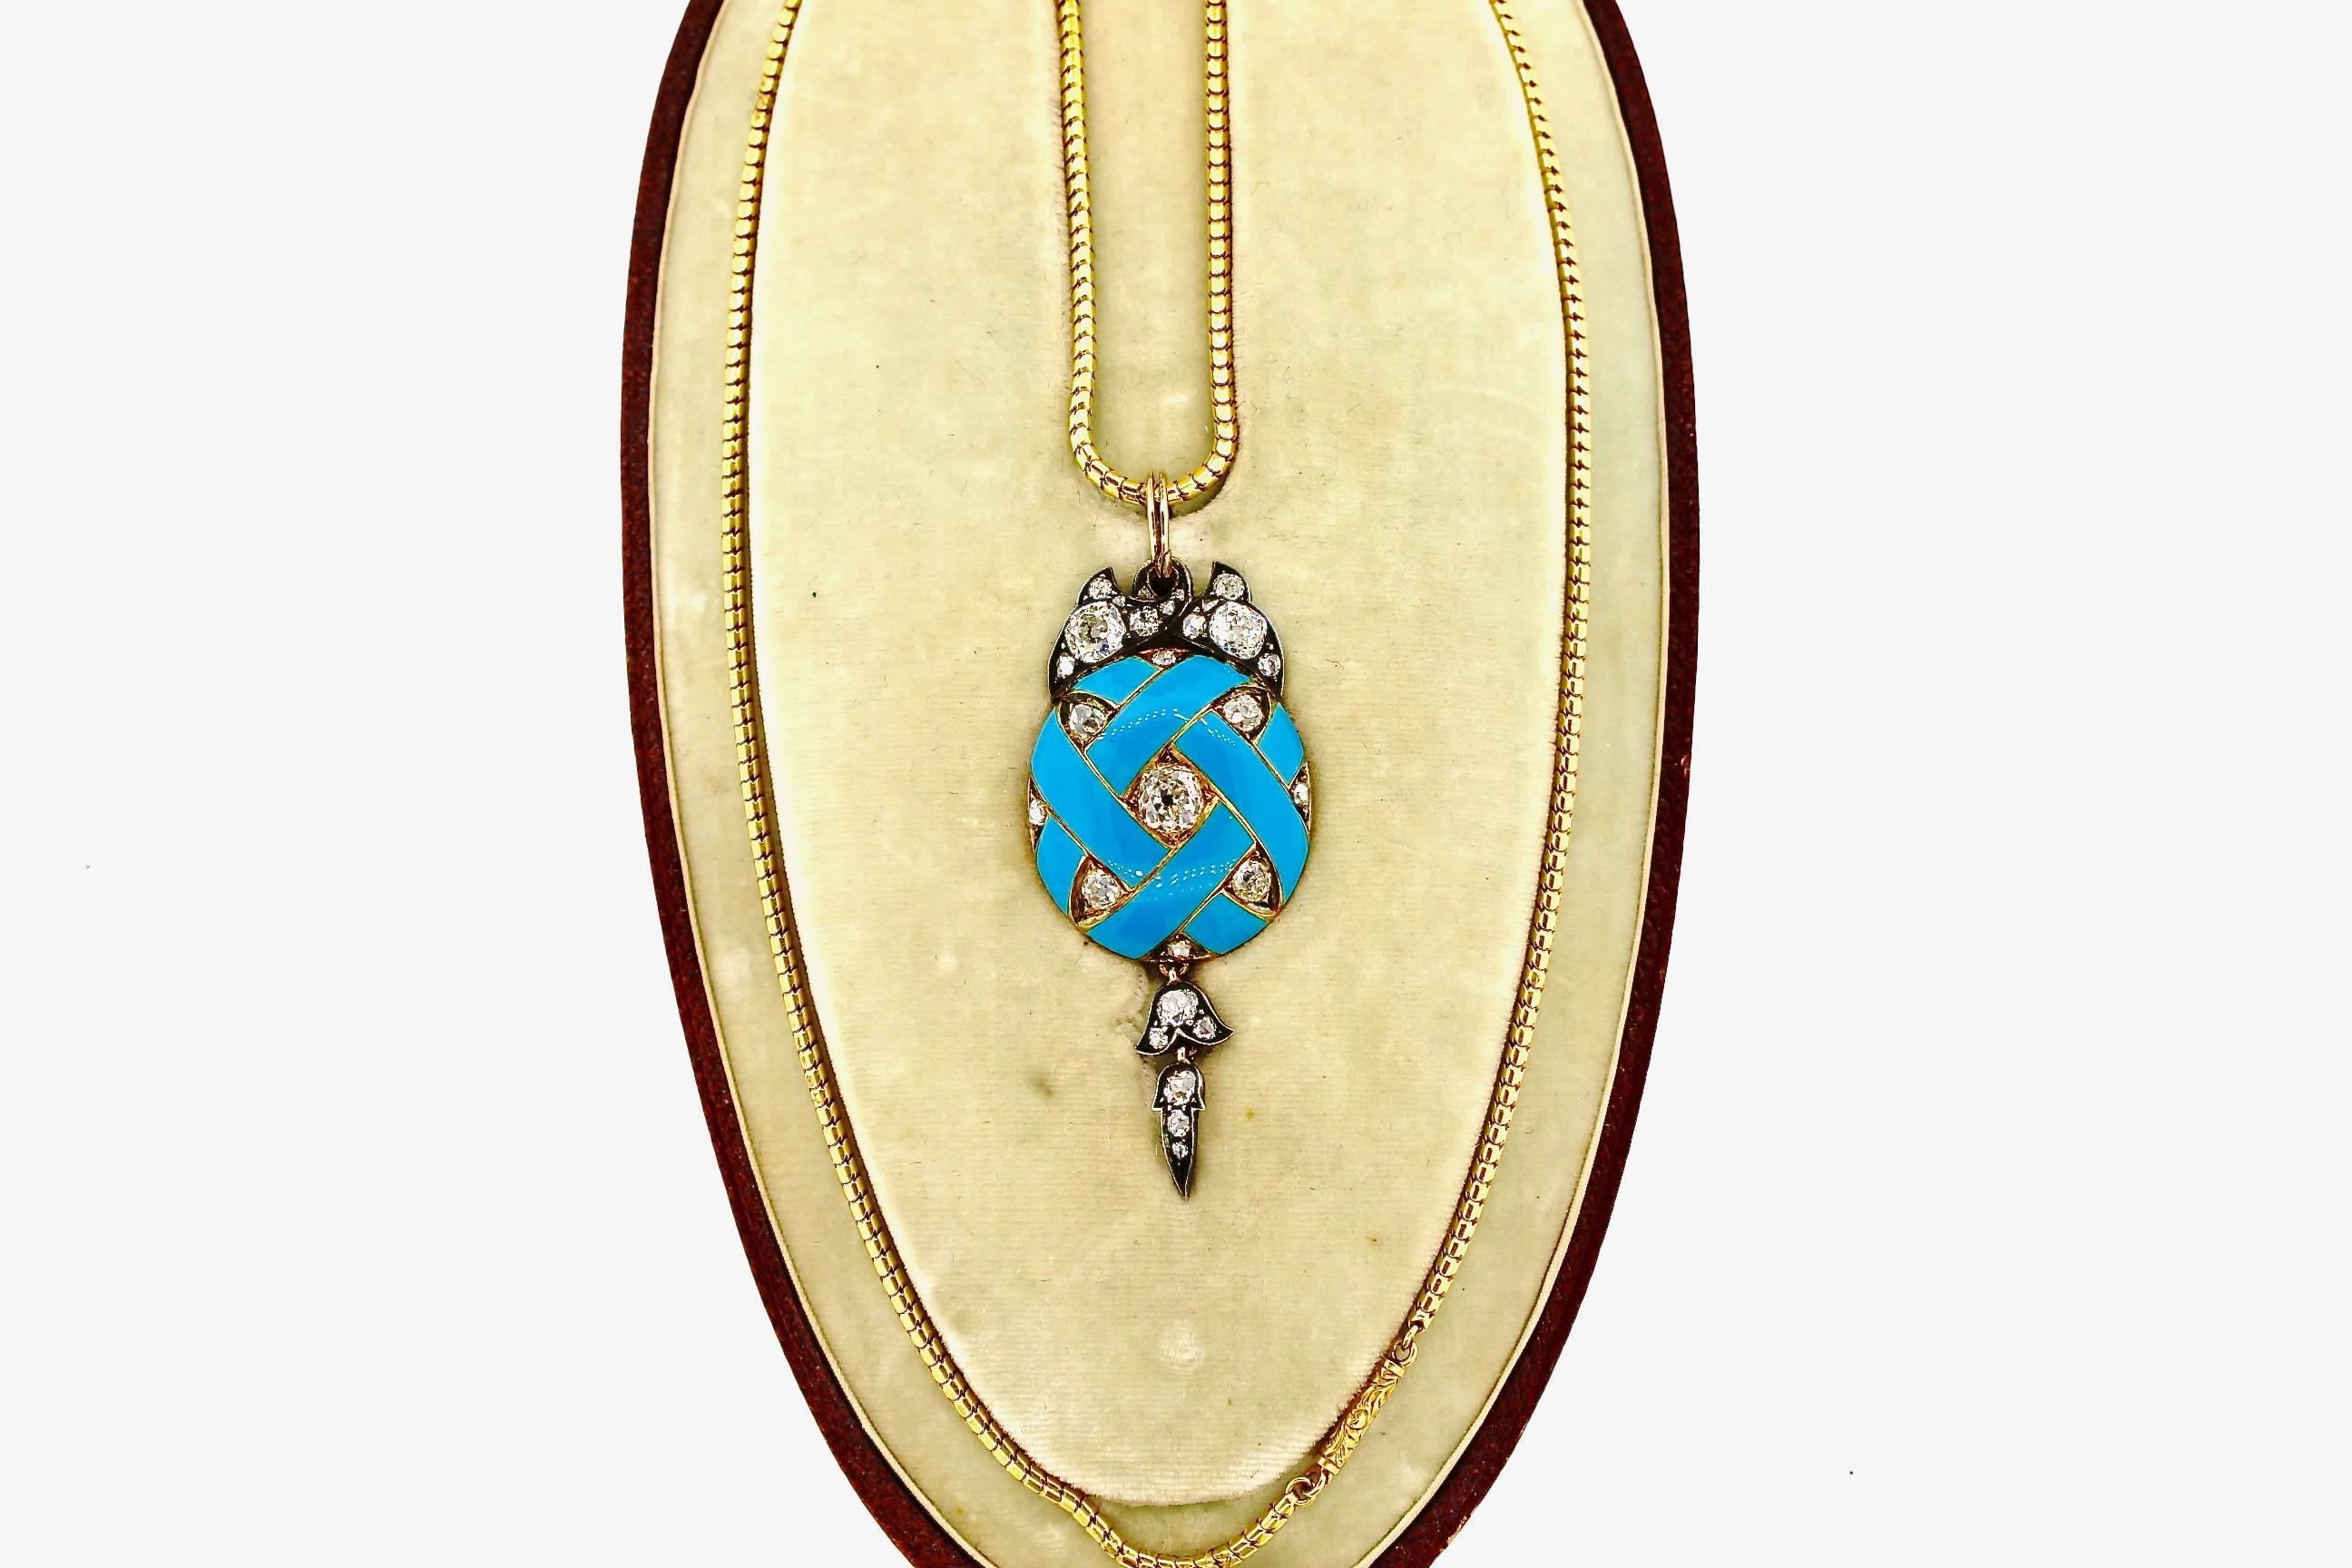 Bright robins egg blue enamel makes this pendant pop.  The enamel makes a design like a basketweave with old cut diamonds set between the weave.  Additionally diamond leaves accent the top of the pendant and a dart of diamonds hang from the bottom. 